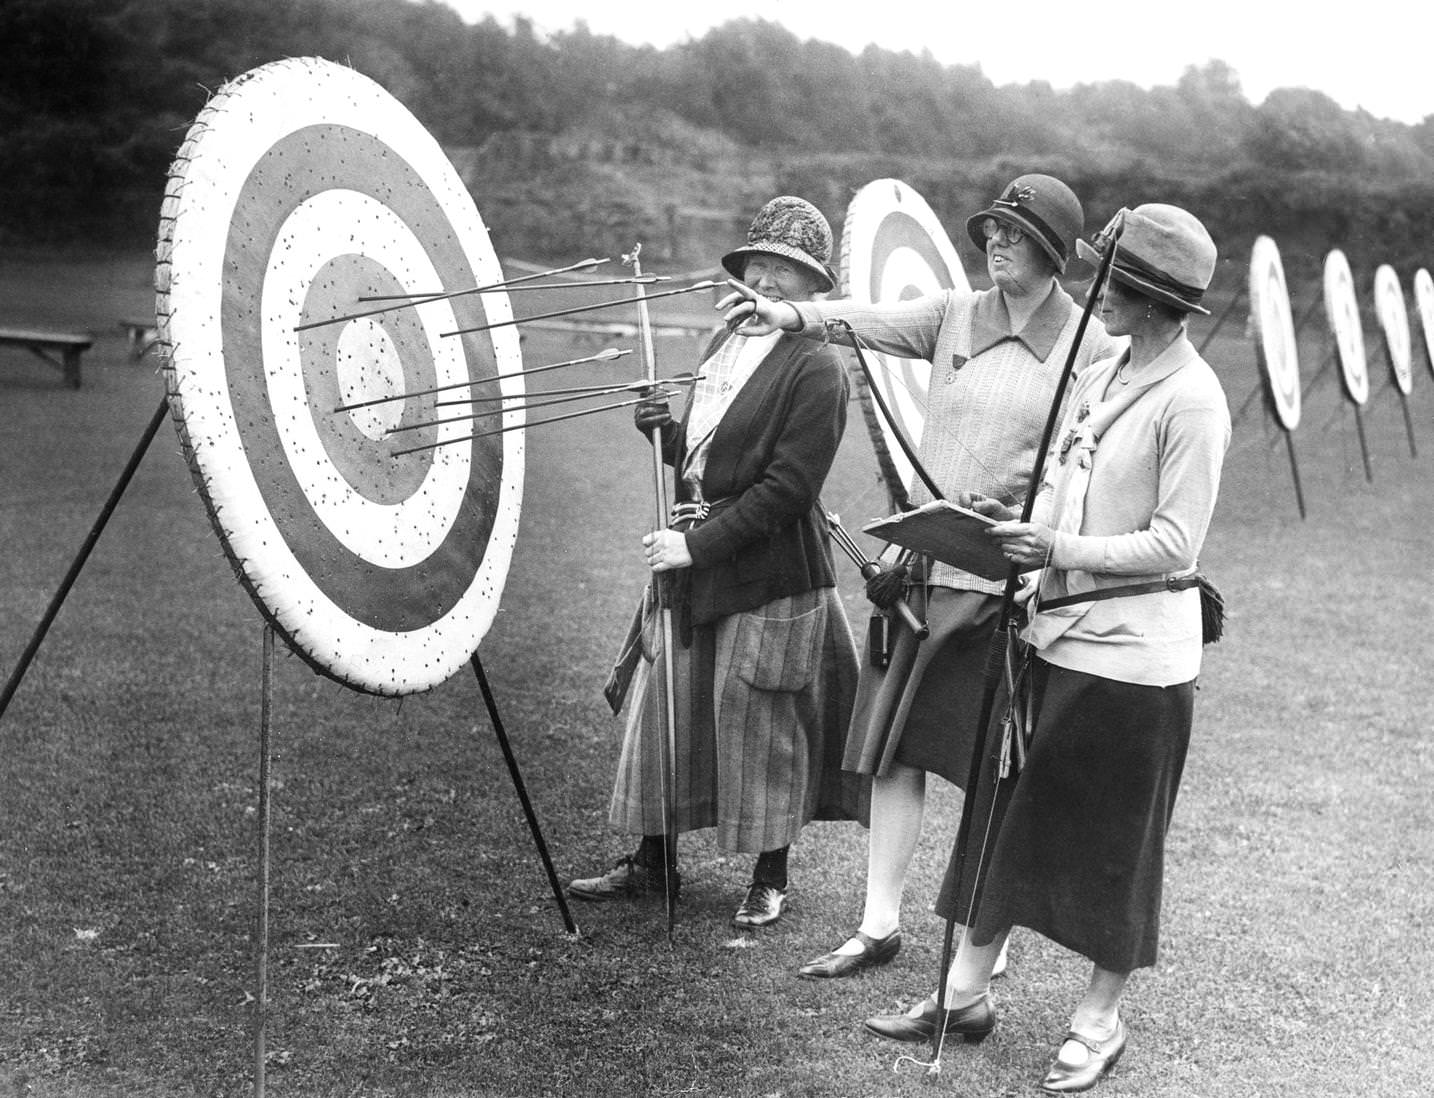 Female competitors checking their scores as they stand before a target during the Southern Counties Archery meeting, held at the Nevill Cricket Ground in Royal Tunbridge Wells, Kent, England, 1925